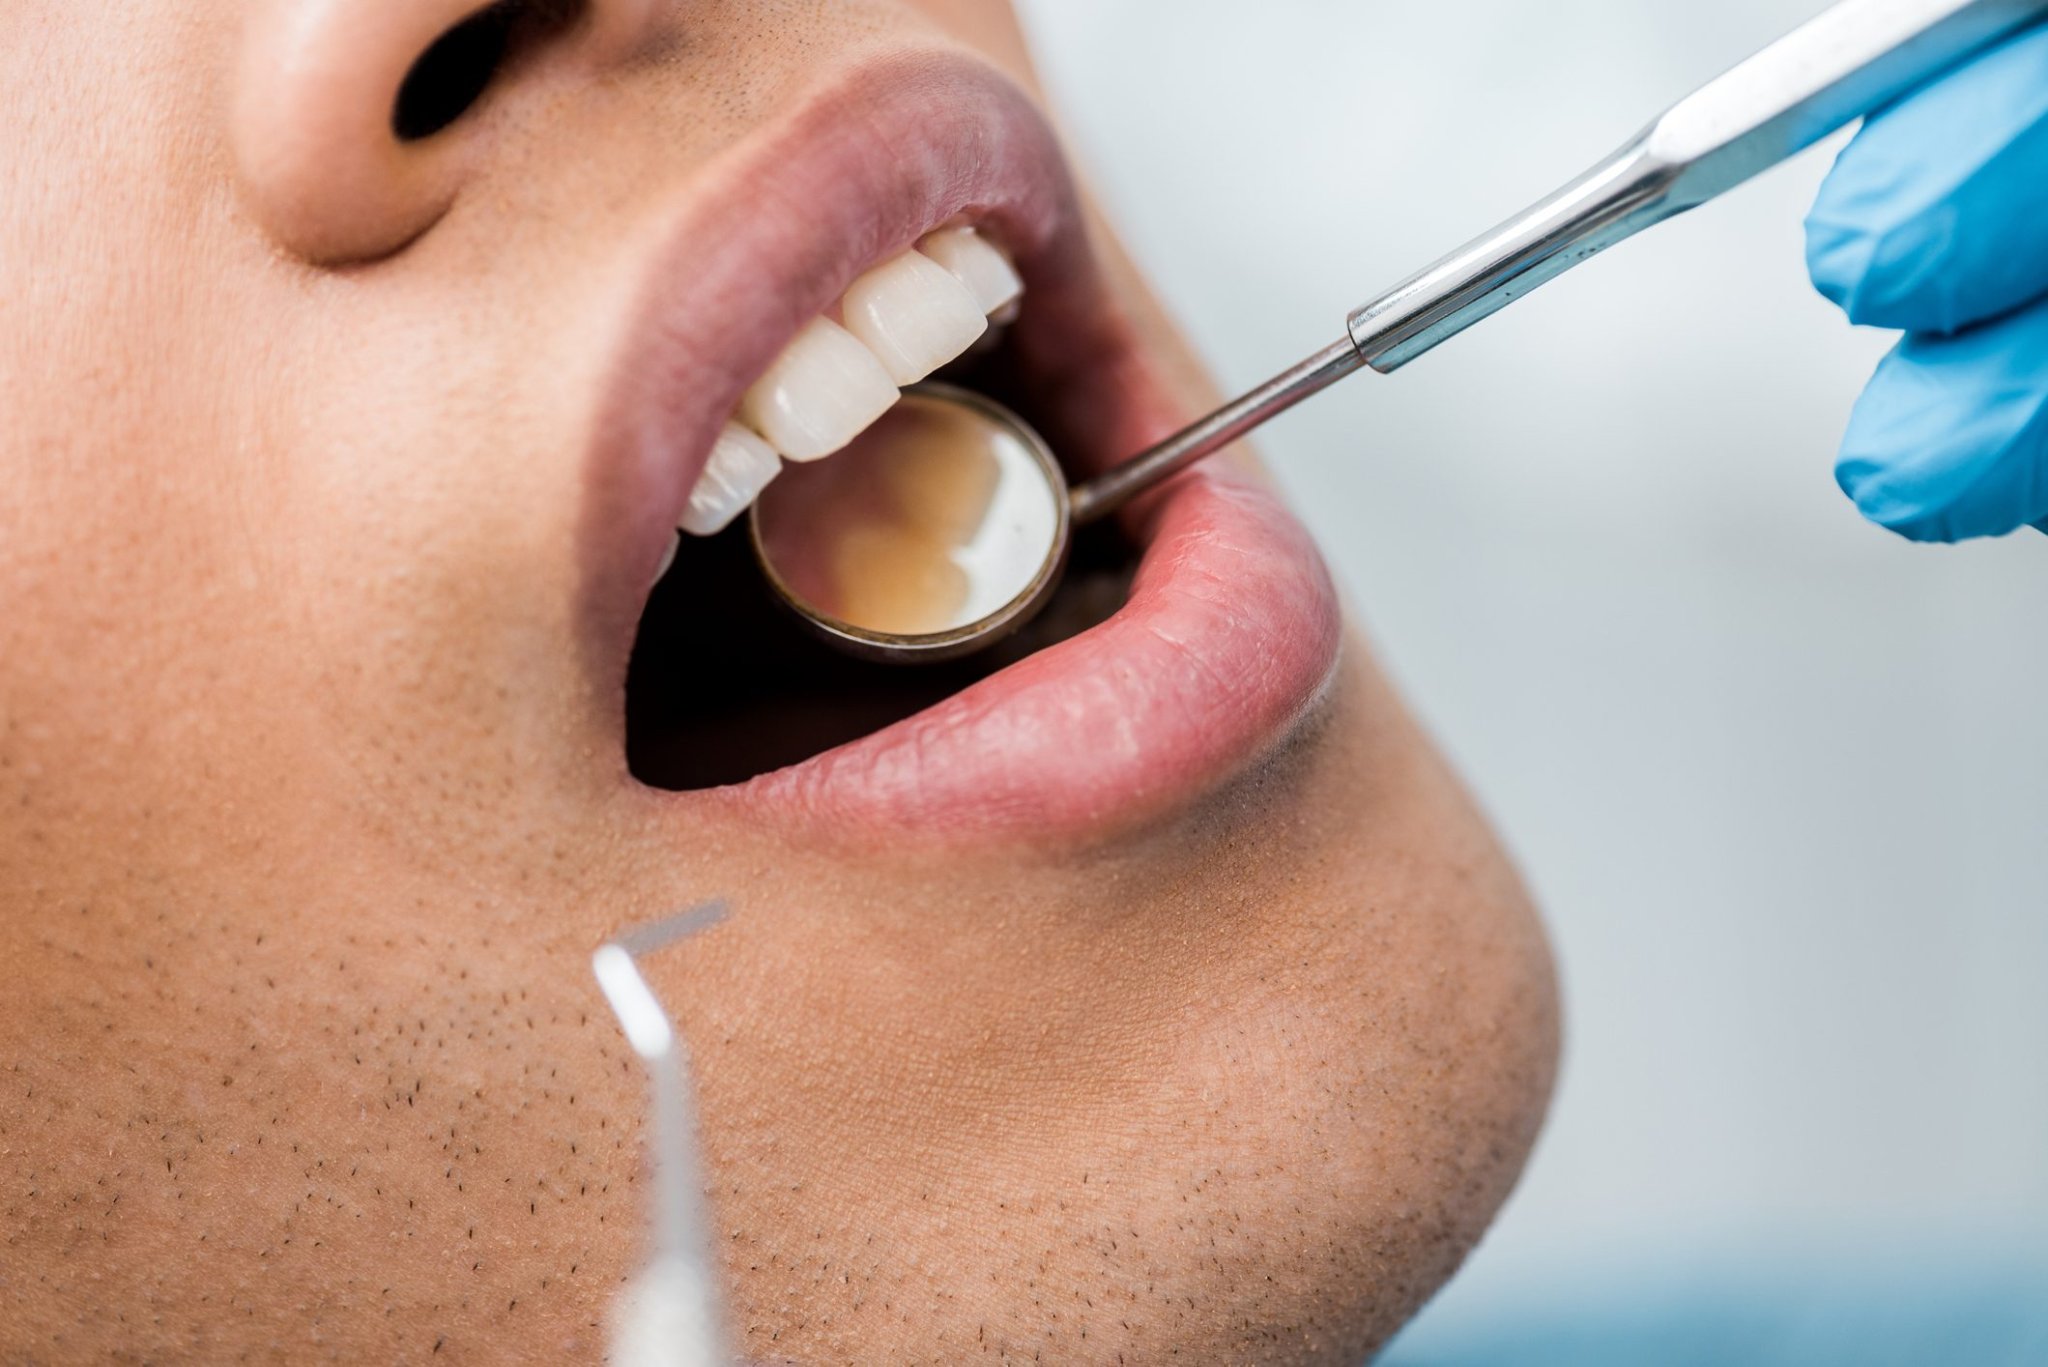 4 Ways Covid-19 Is Bad for Your Teeth, According to Dentists